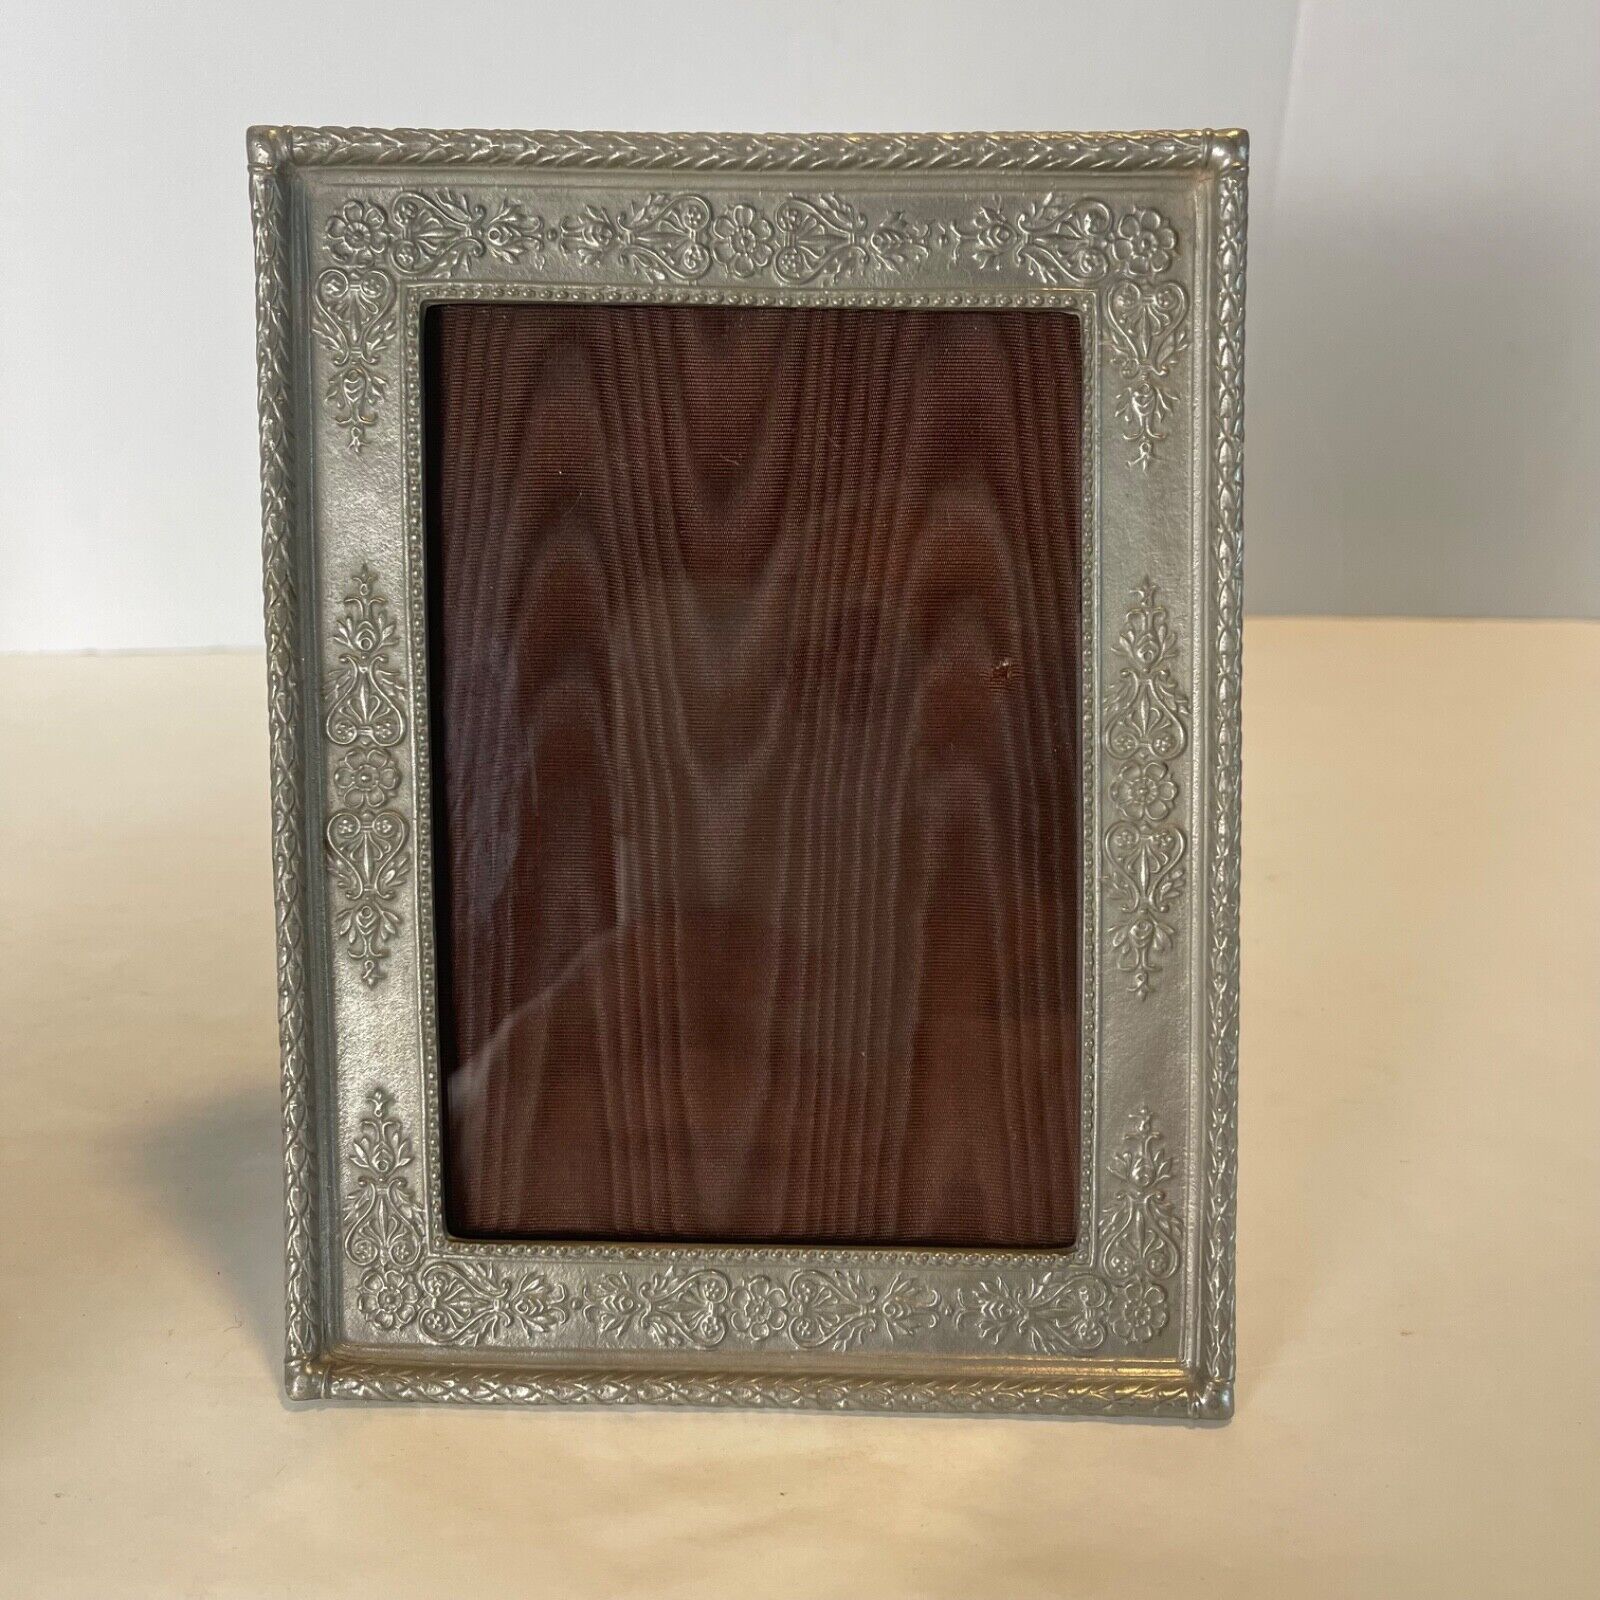 Gorham Pewter 135 Picture Frame for 4